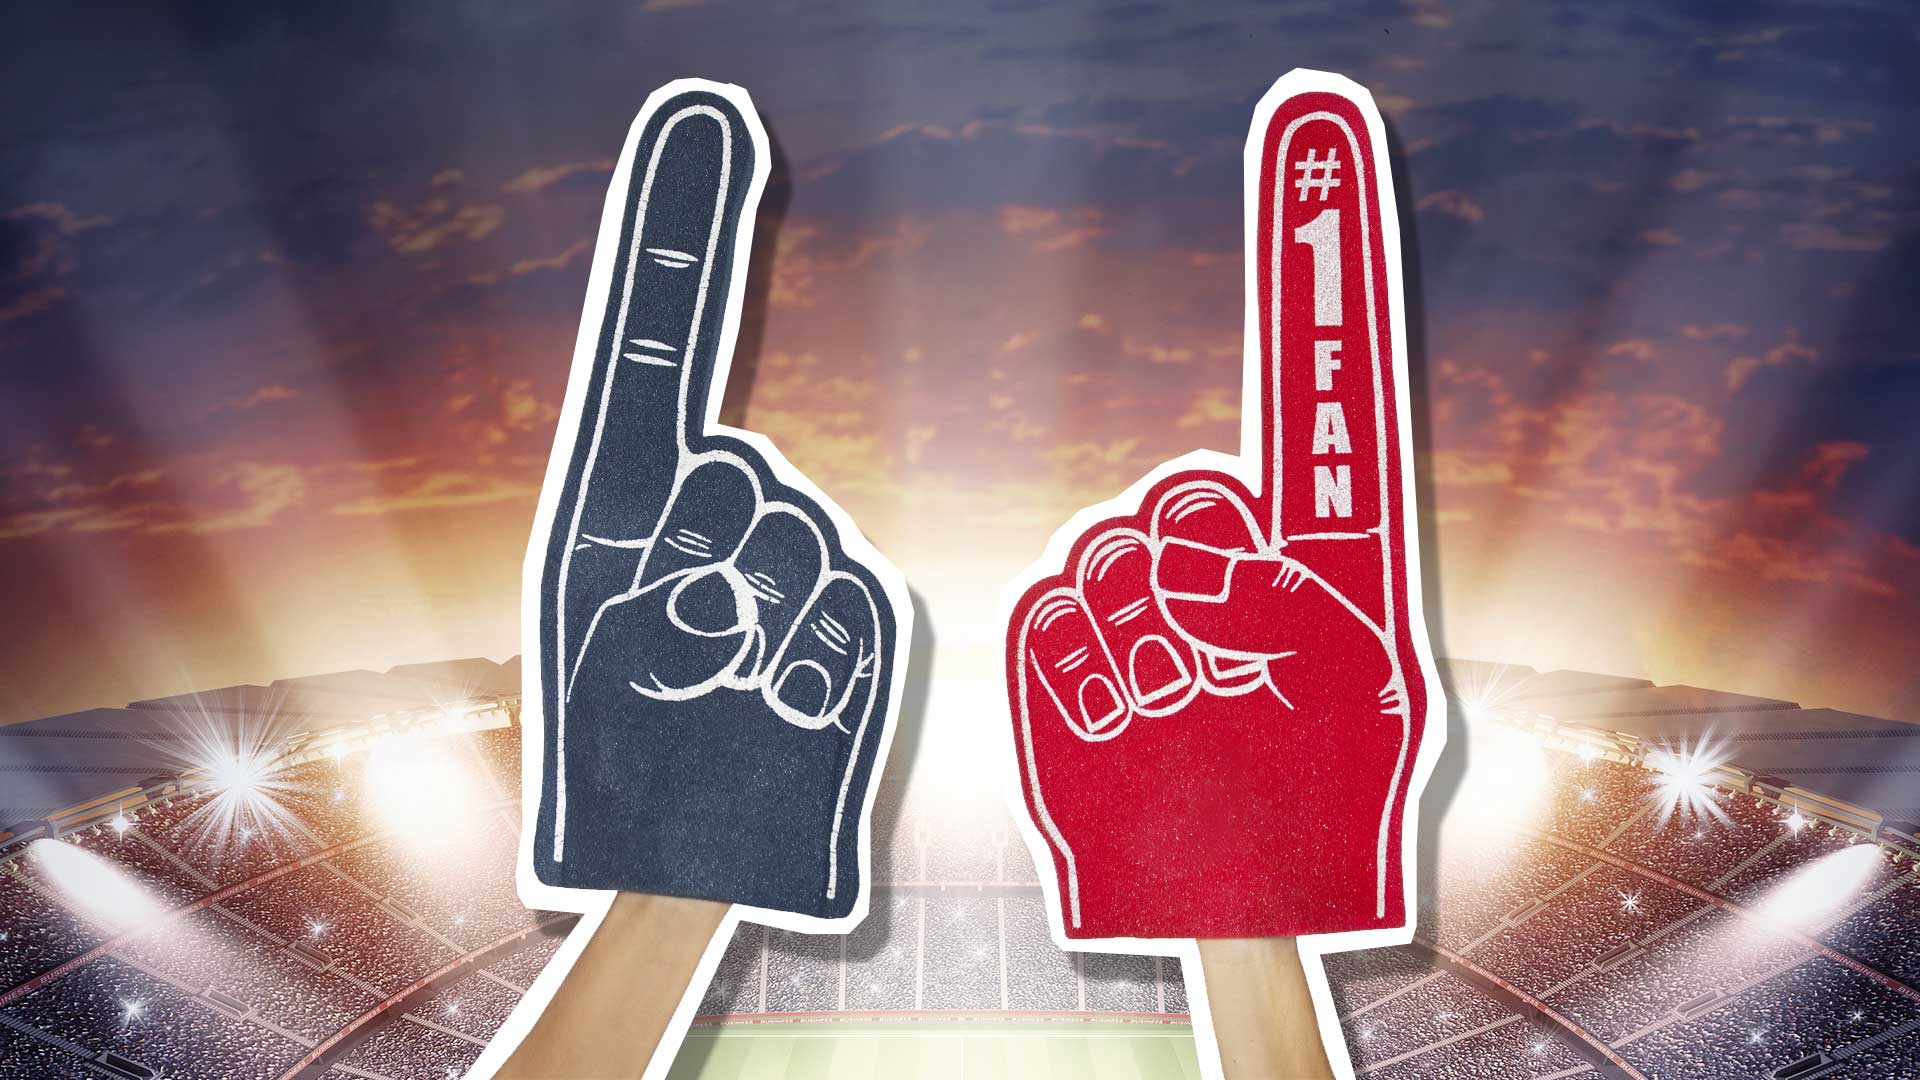 Red and blue foam hands with a stadium in the background